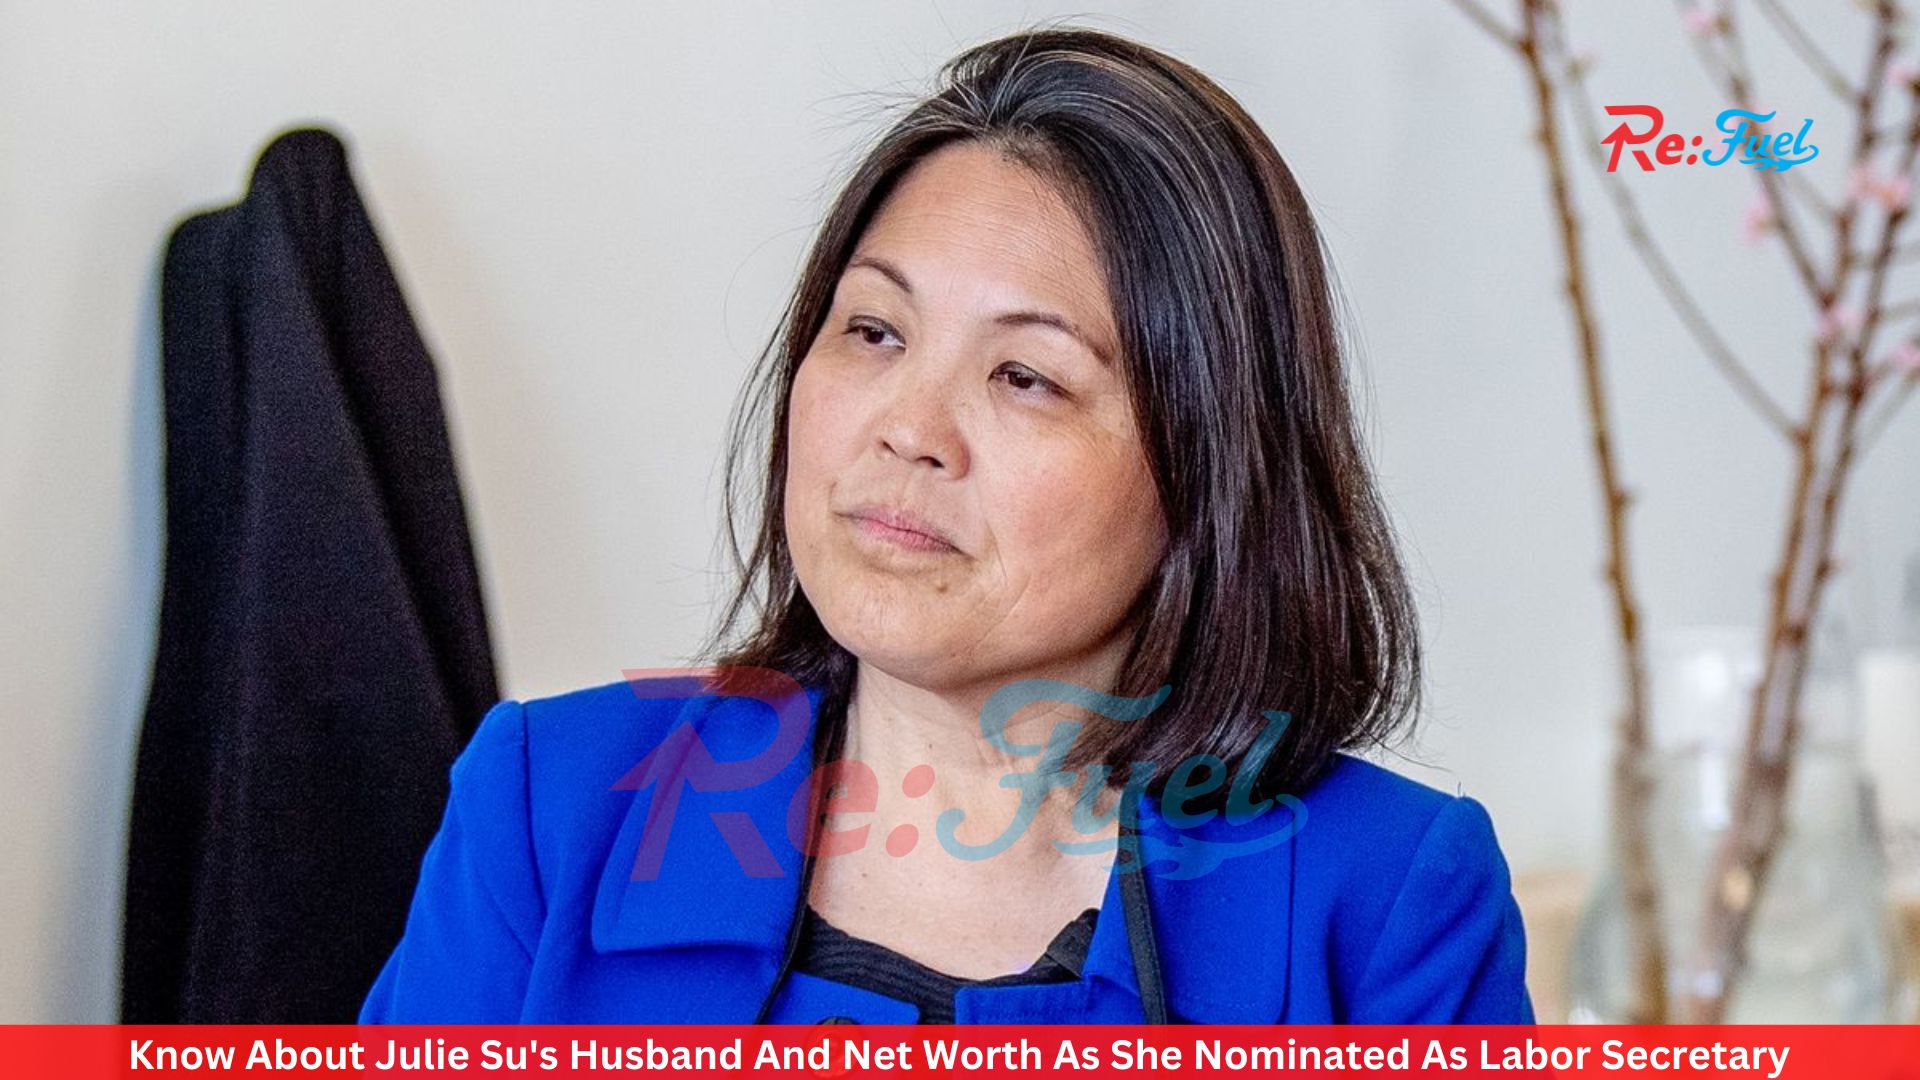 Know About Julie Su's Husband And Net Worth As She Nominated As Labor Secretary